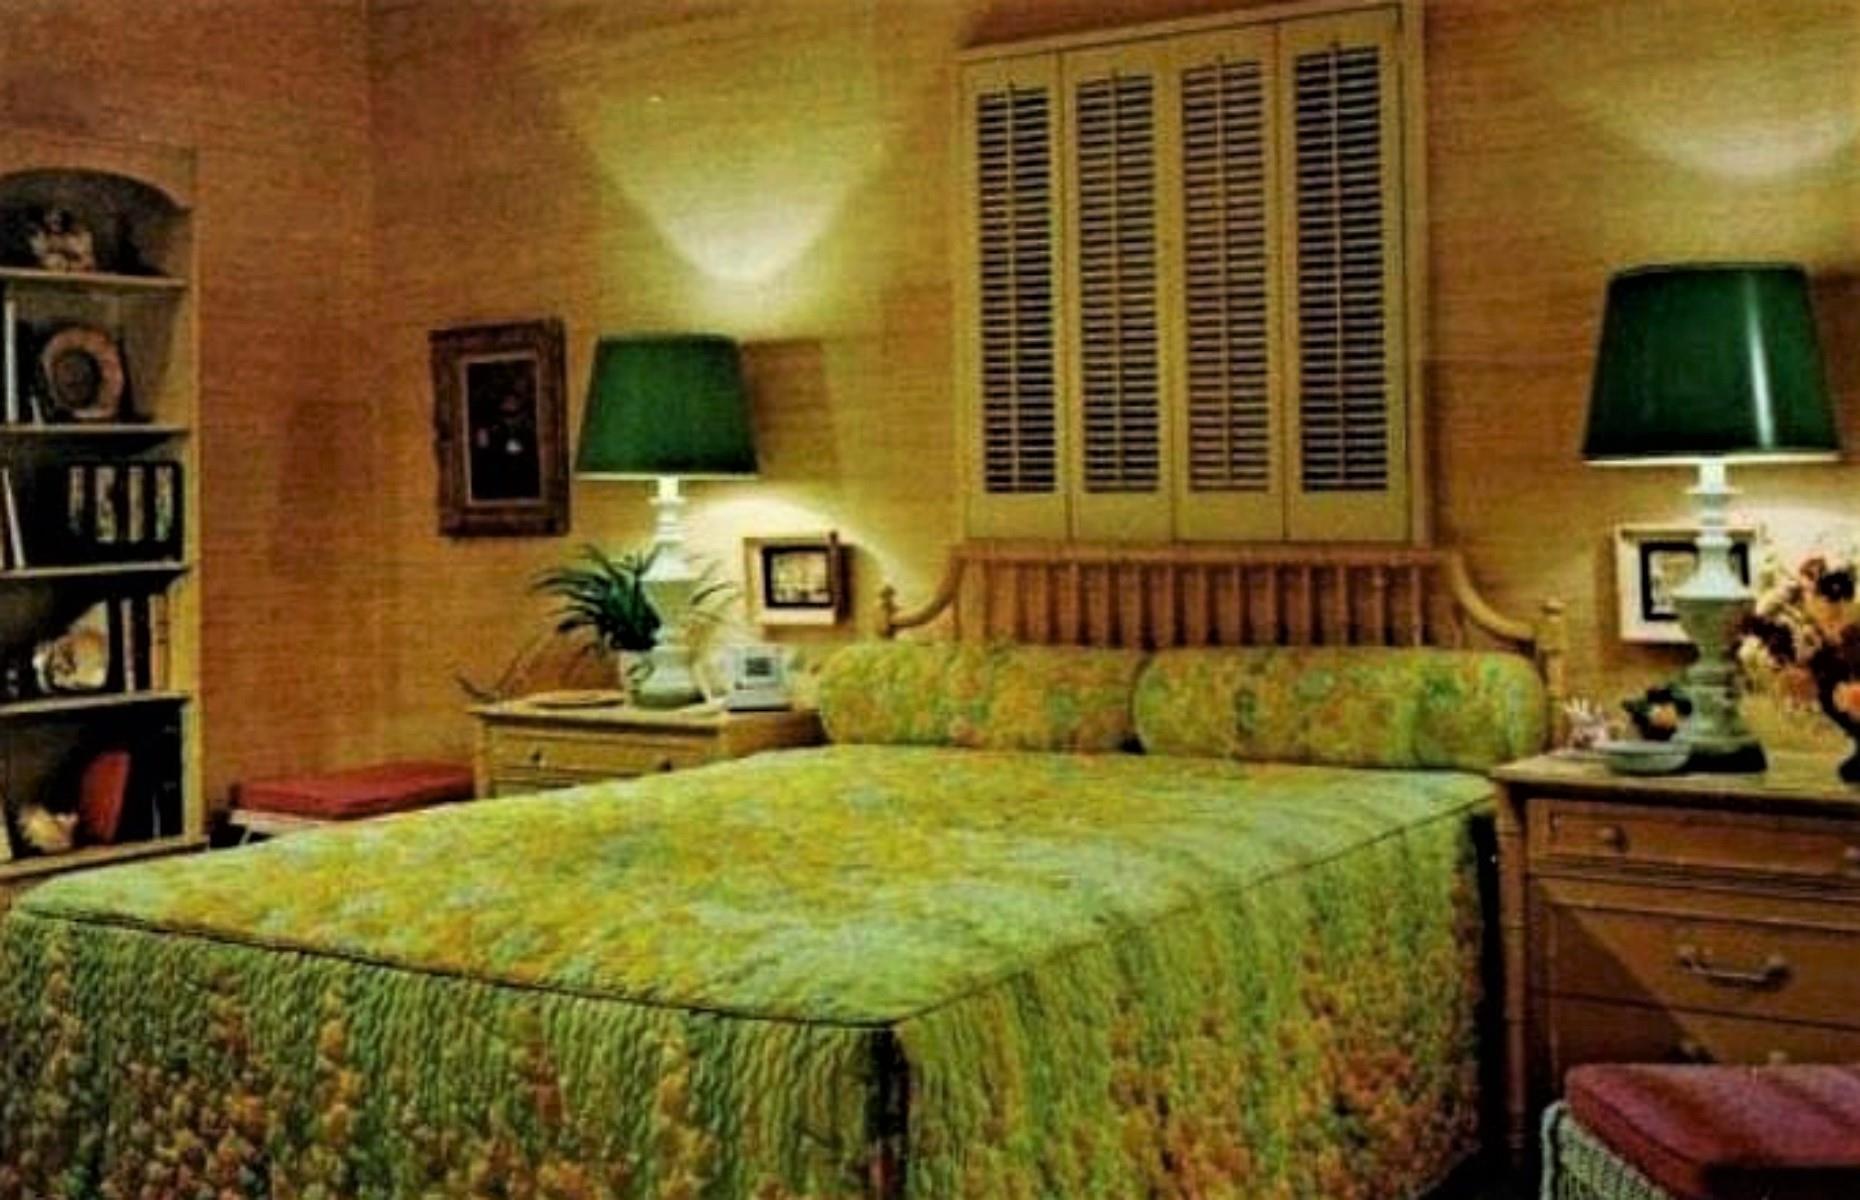 When this room. Bedroom 1970s. Vintage 70's Room.